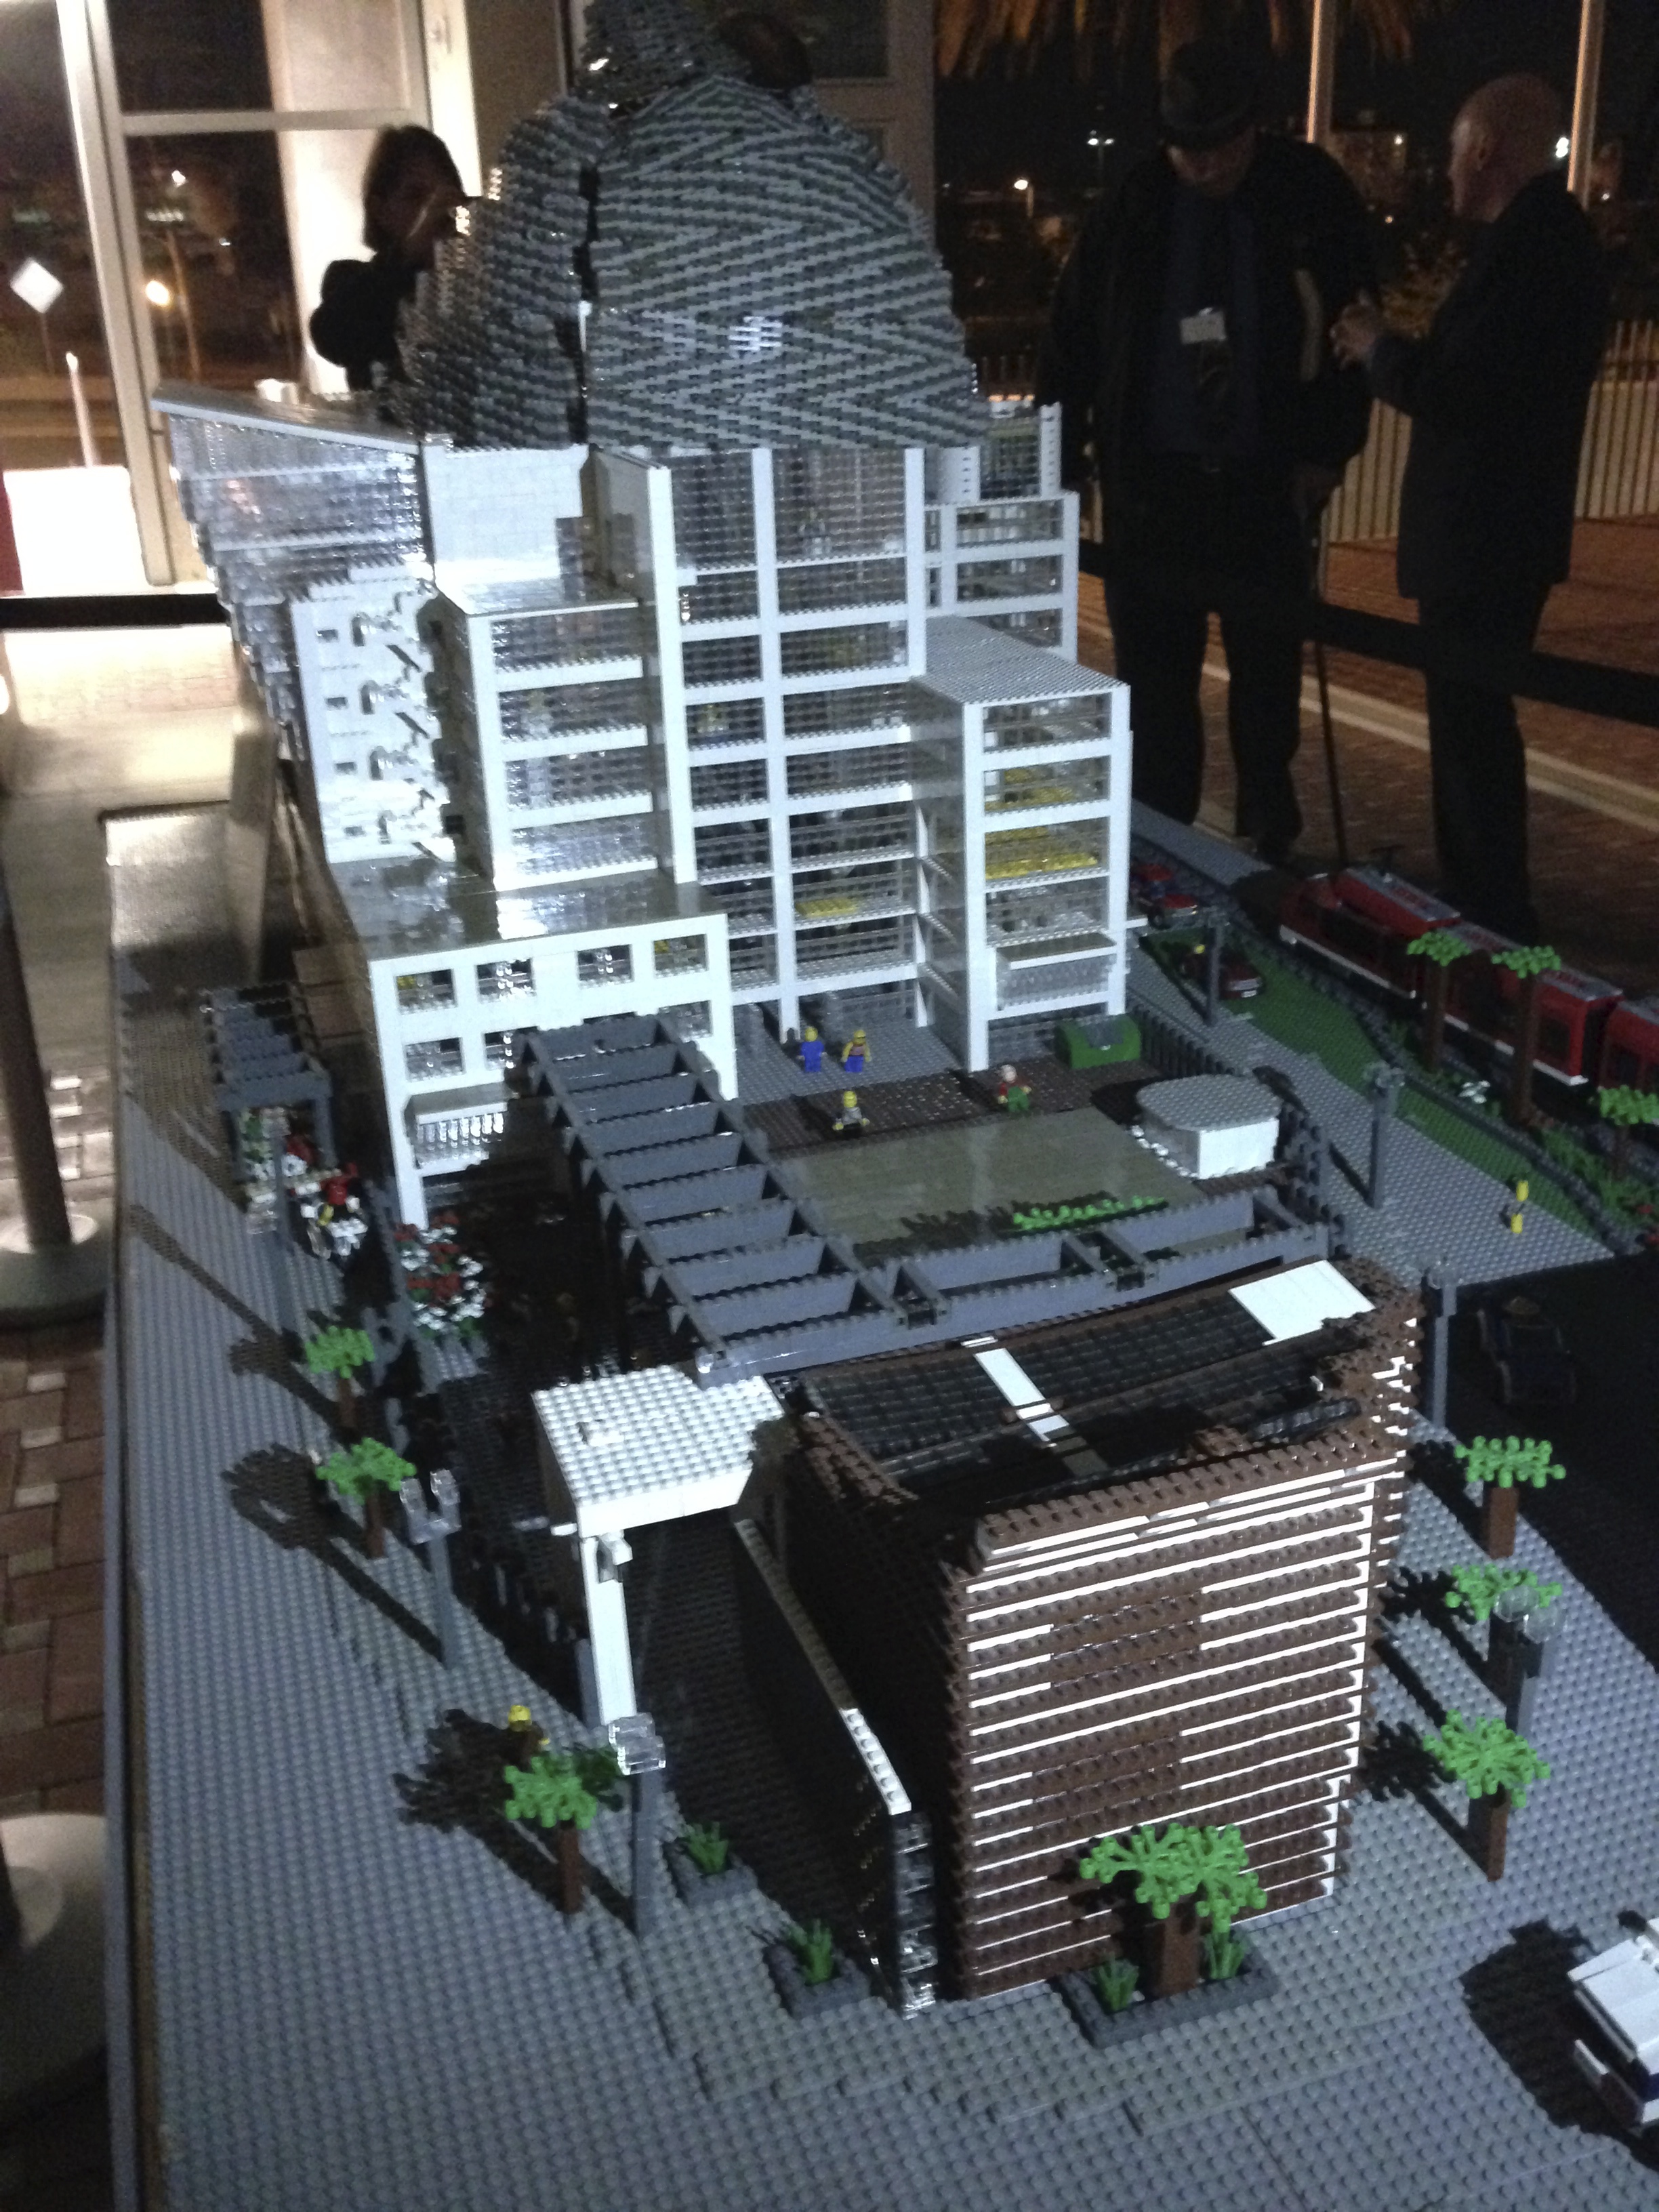 Photo of a model of the San Diego Main Library made of Lego bricks